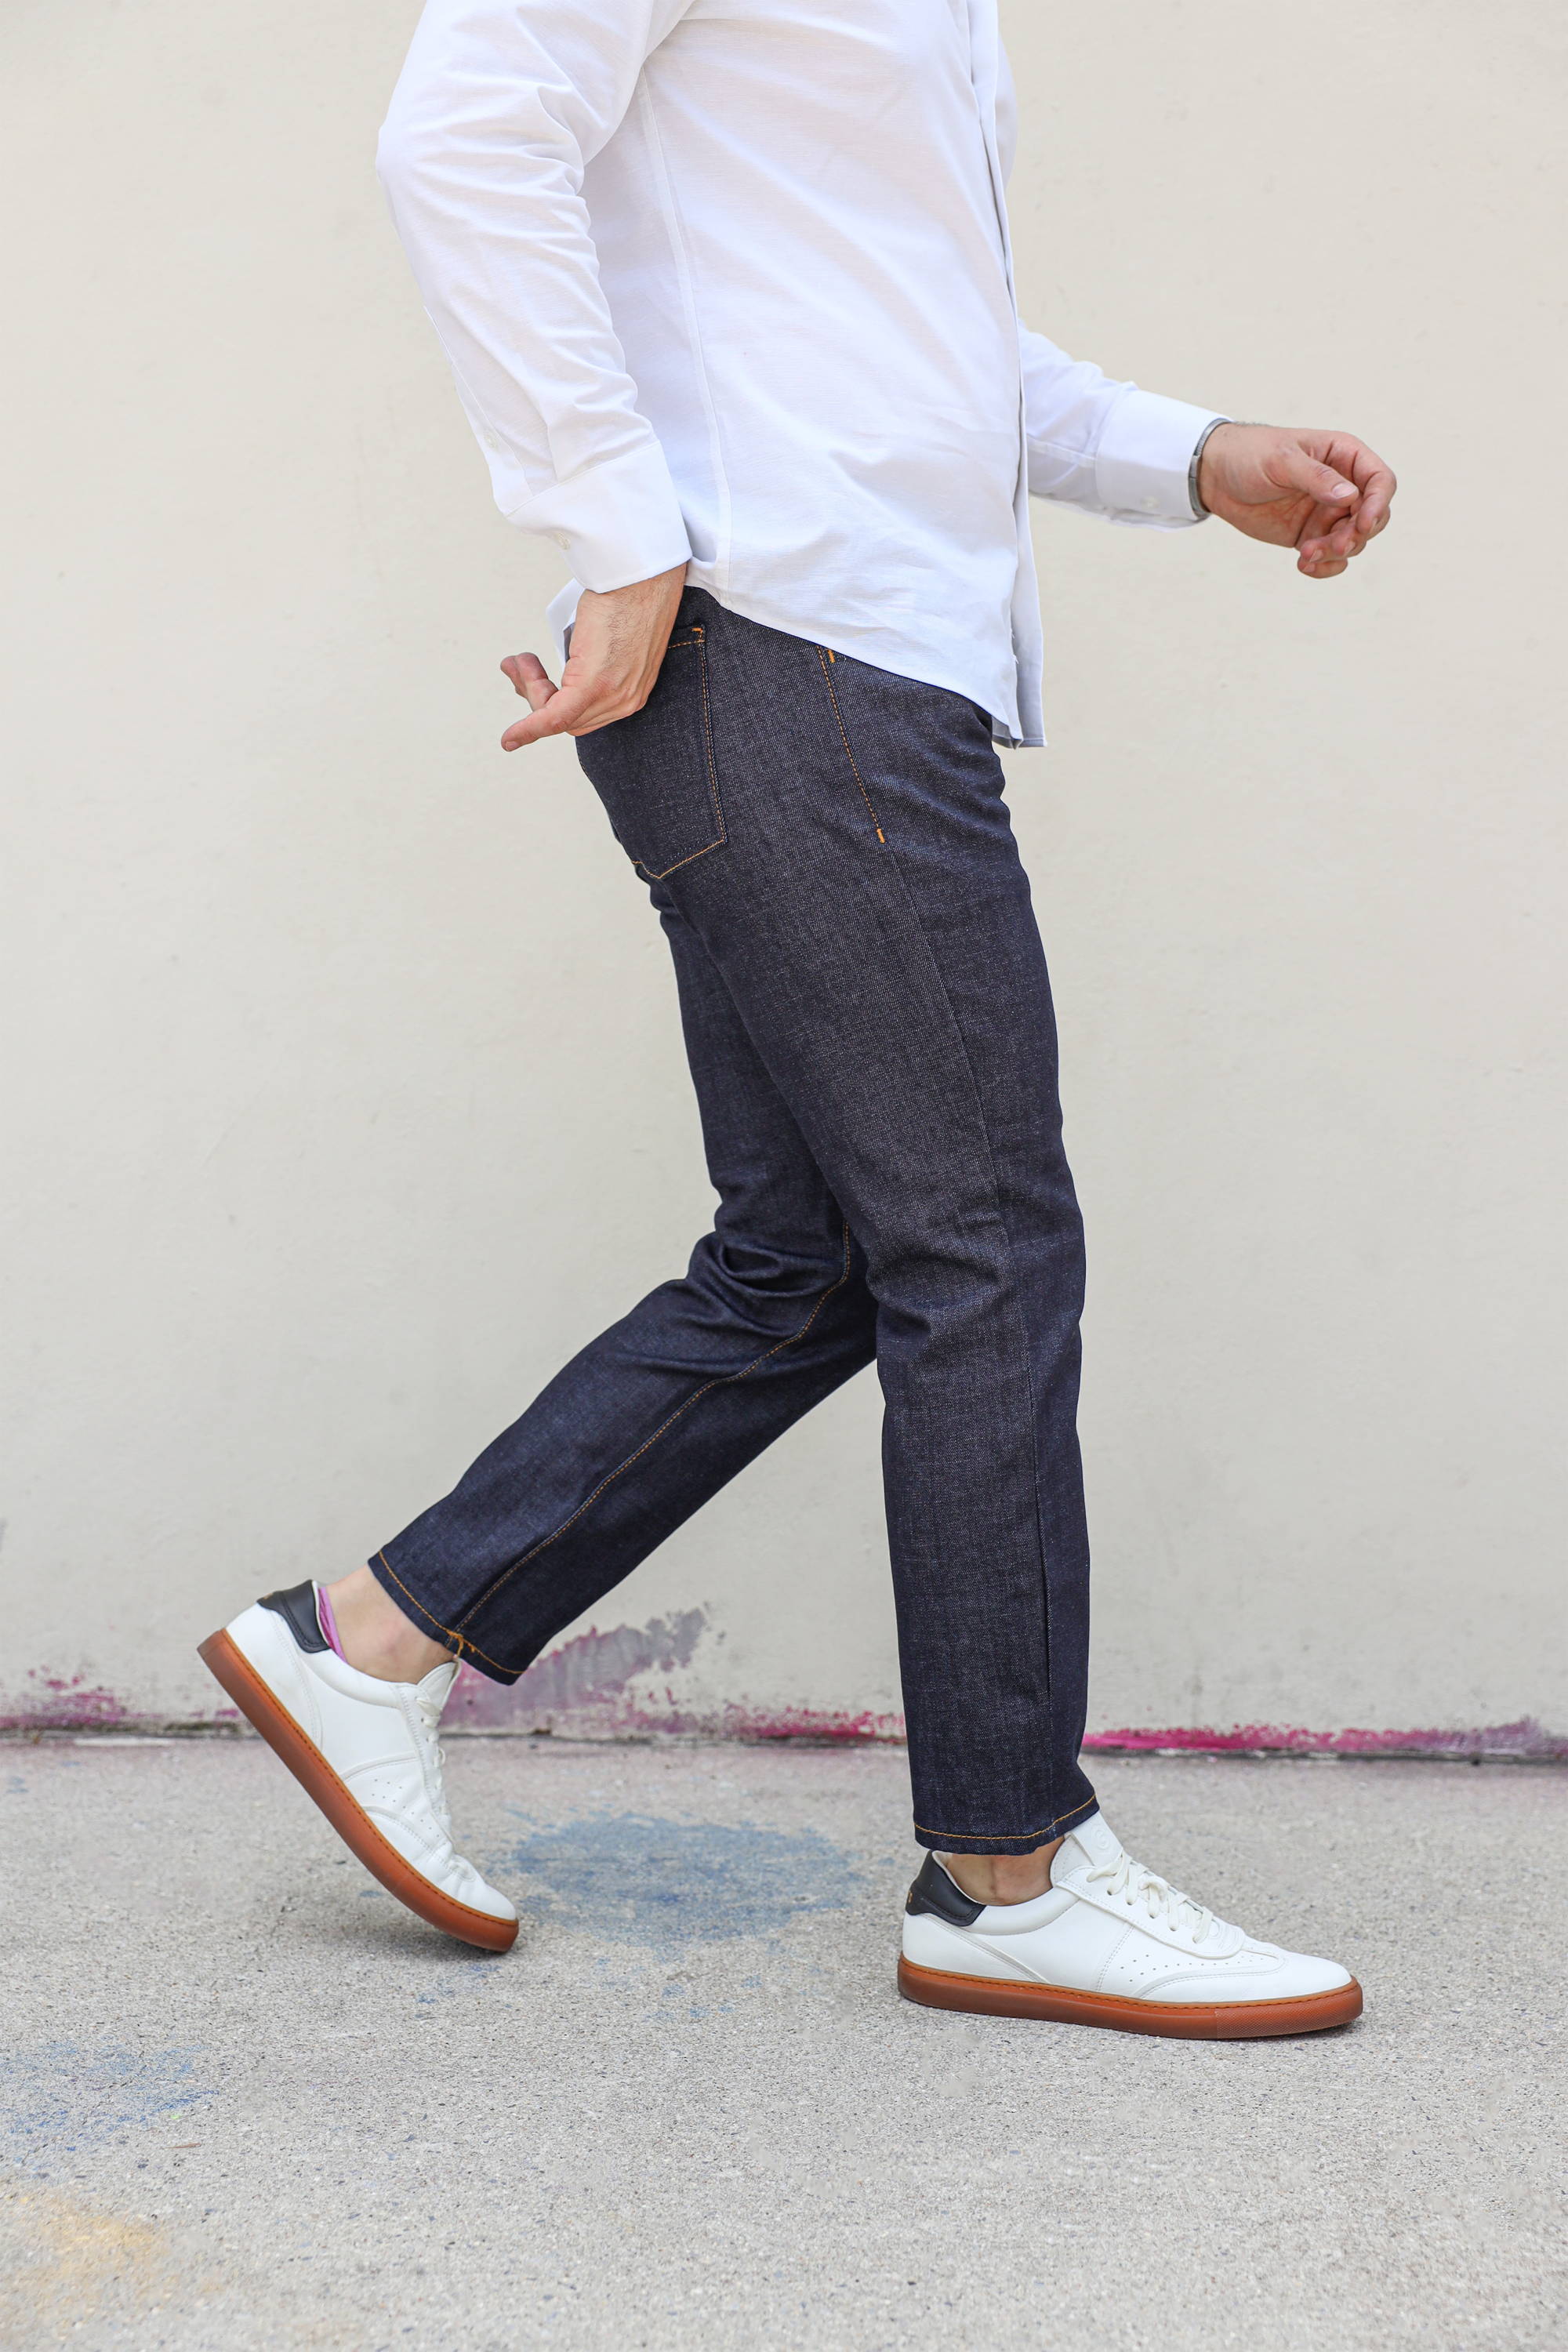 Man walking wearing white tennis shoes, white button down shirt, and Xavier Raw Wash Stretch Jeans from Under510.com